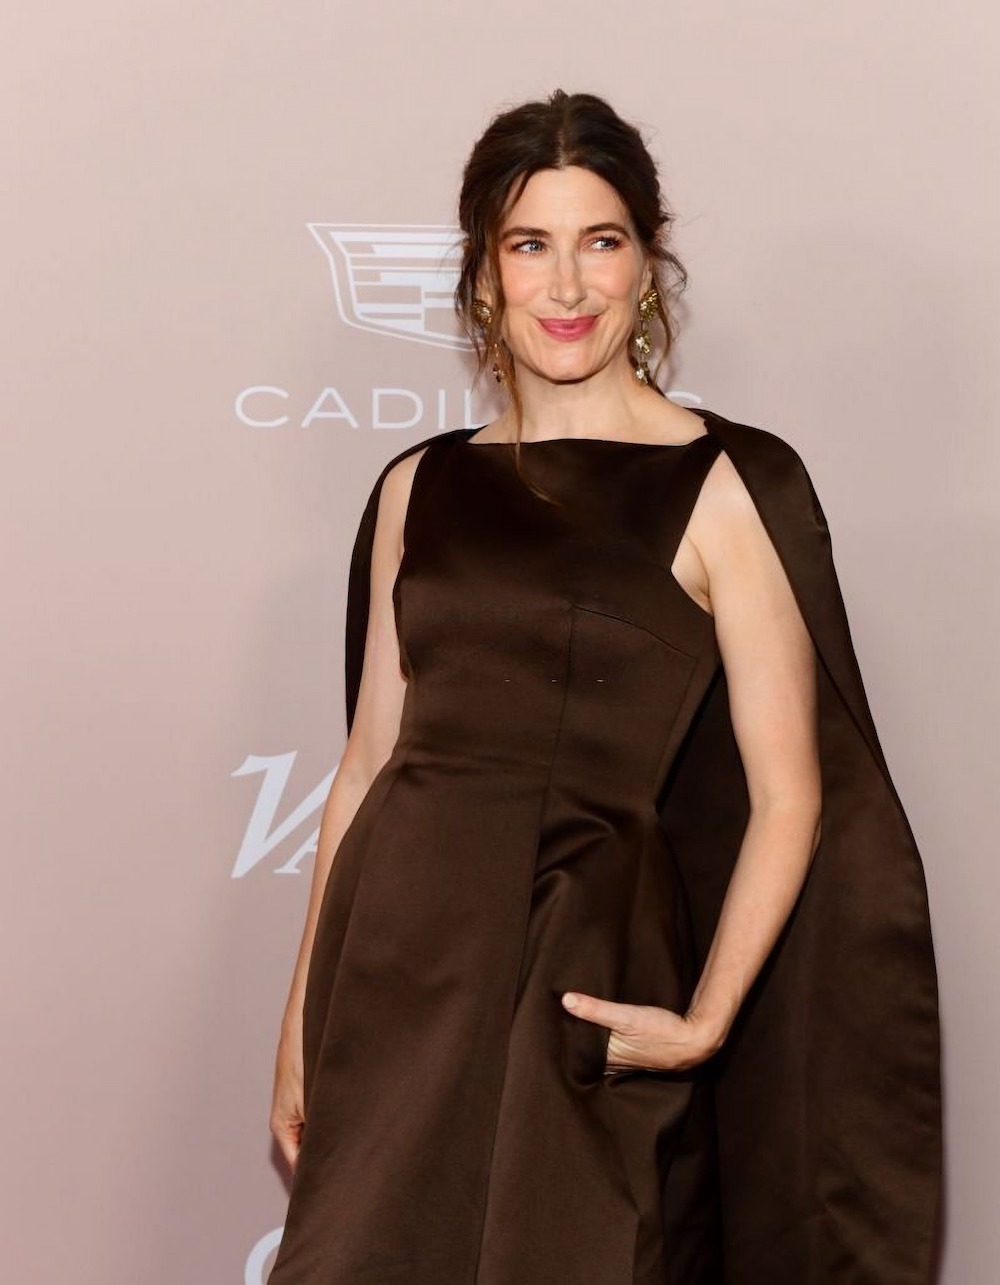 Kathryn Hahn in Emilia Wickstead at Variety’s 2022 Power of Women Event